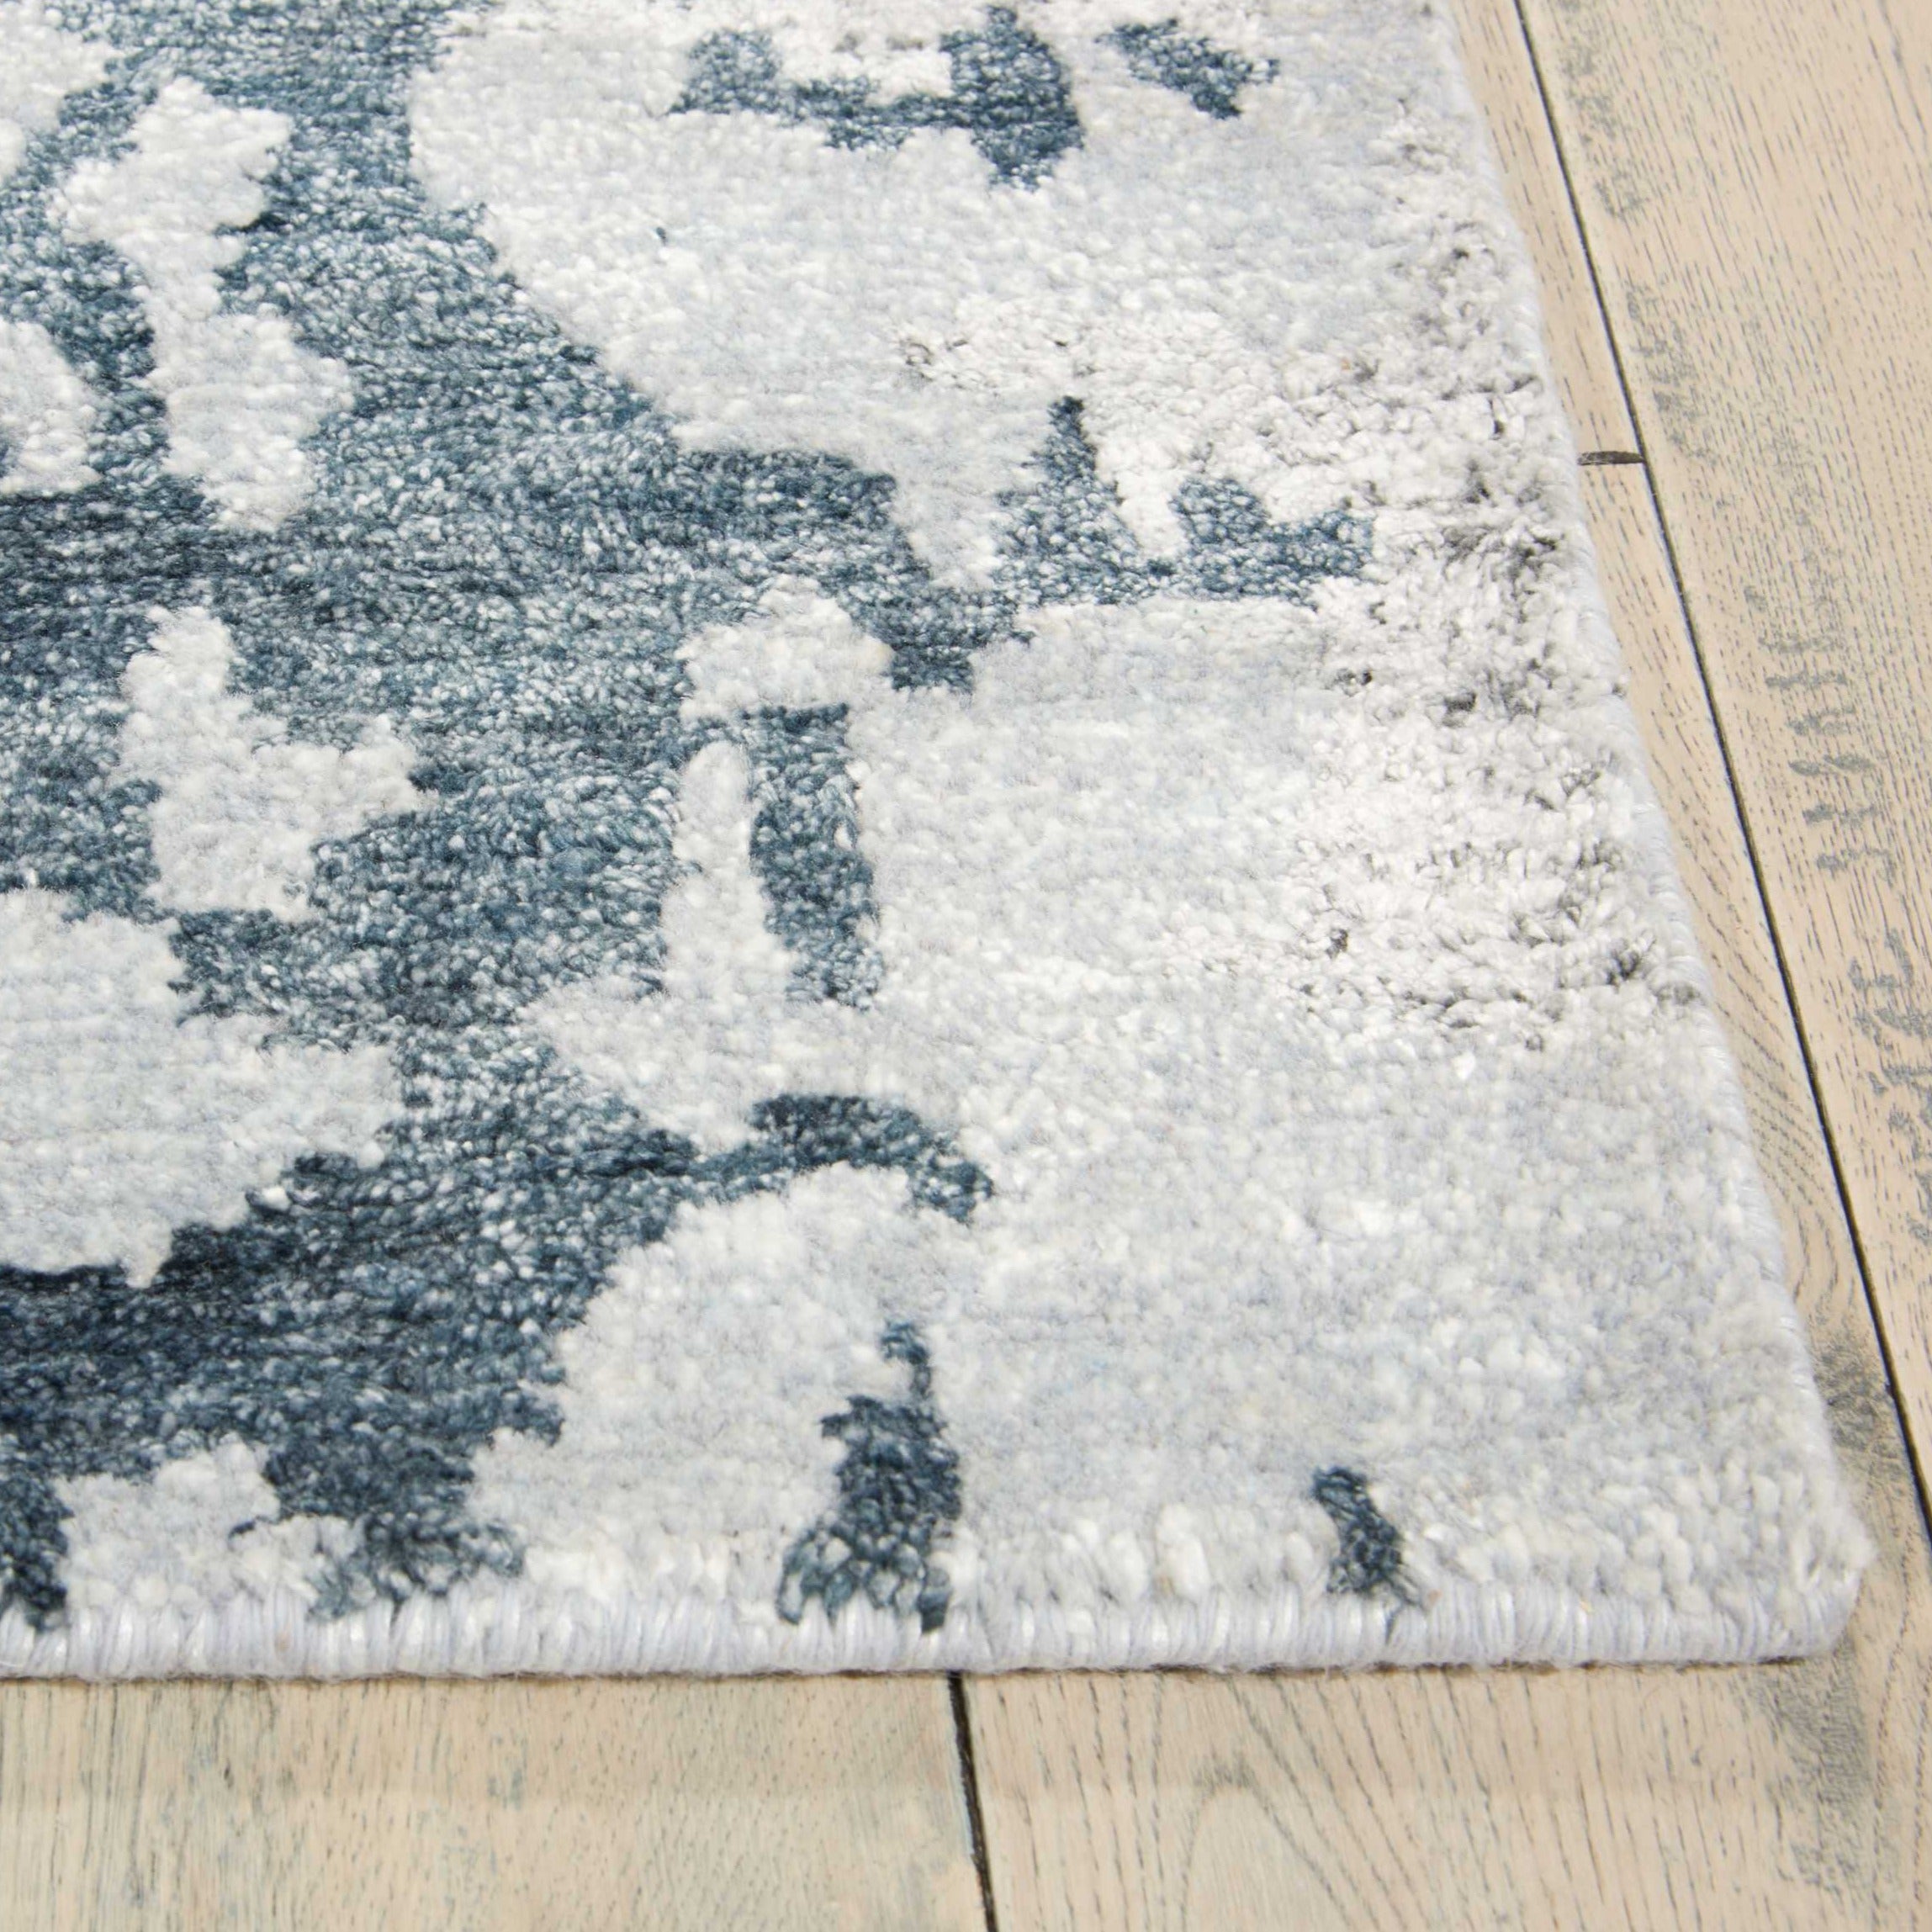 A close-up view of a plush blue and white patterned rug.